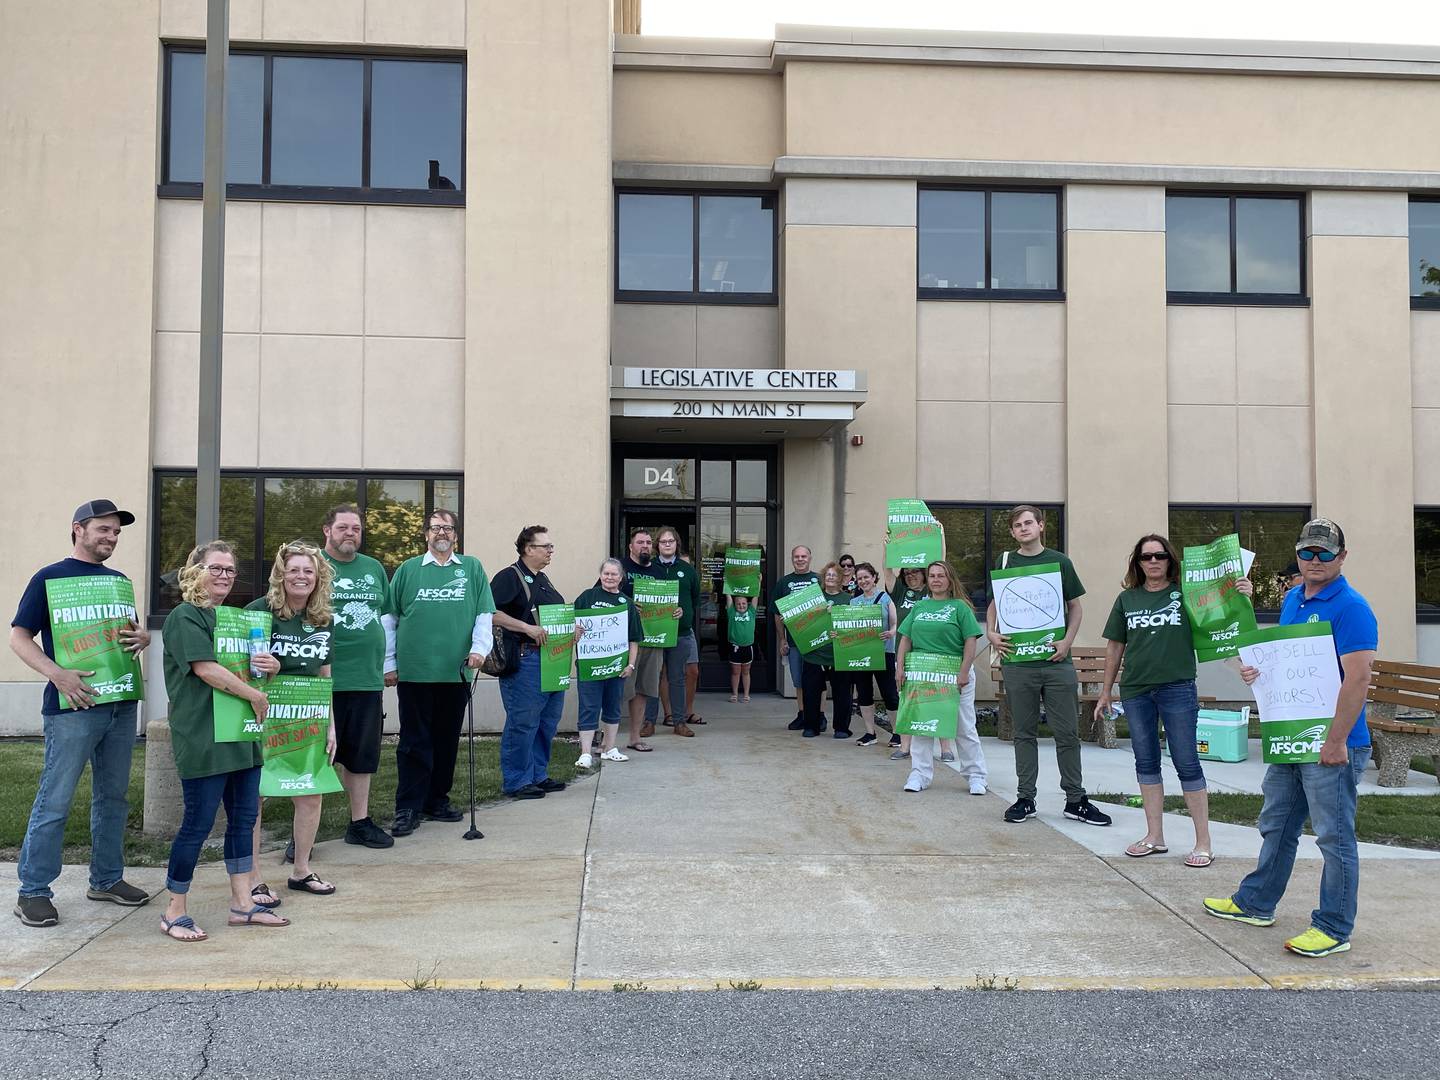 Members of the American Federation of State, County and Municipal Employees #3537, stand outside the Legislative Center in Sycamore ahead of the DeKalb County Board Wednesday, June 15, 2022 imploring the board to vote no on a proposed sale of the struggling DeKalb County Rehabilitation and Nursing Center.